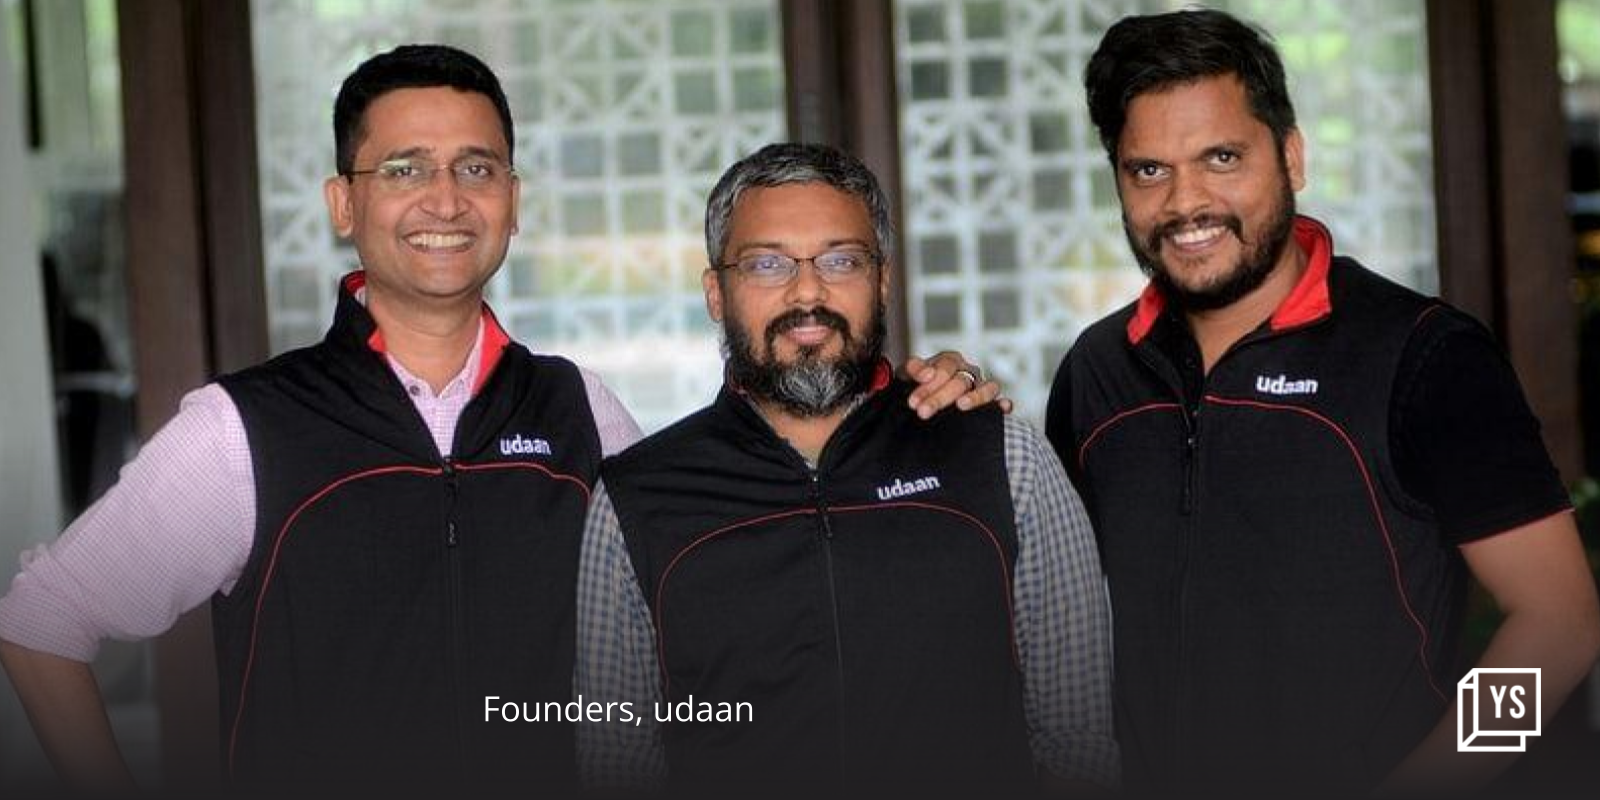 udaan raises $120M in convertible notes and debt